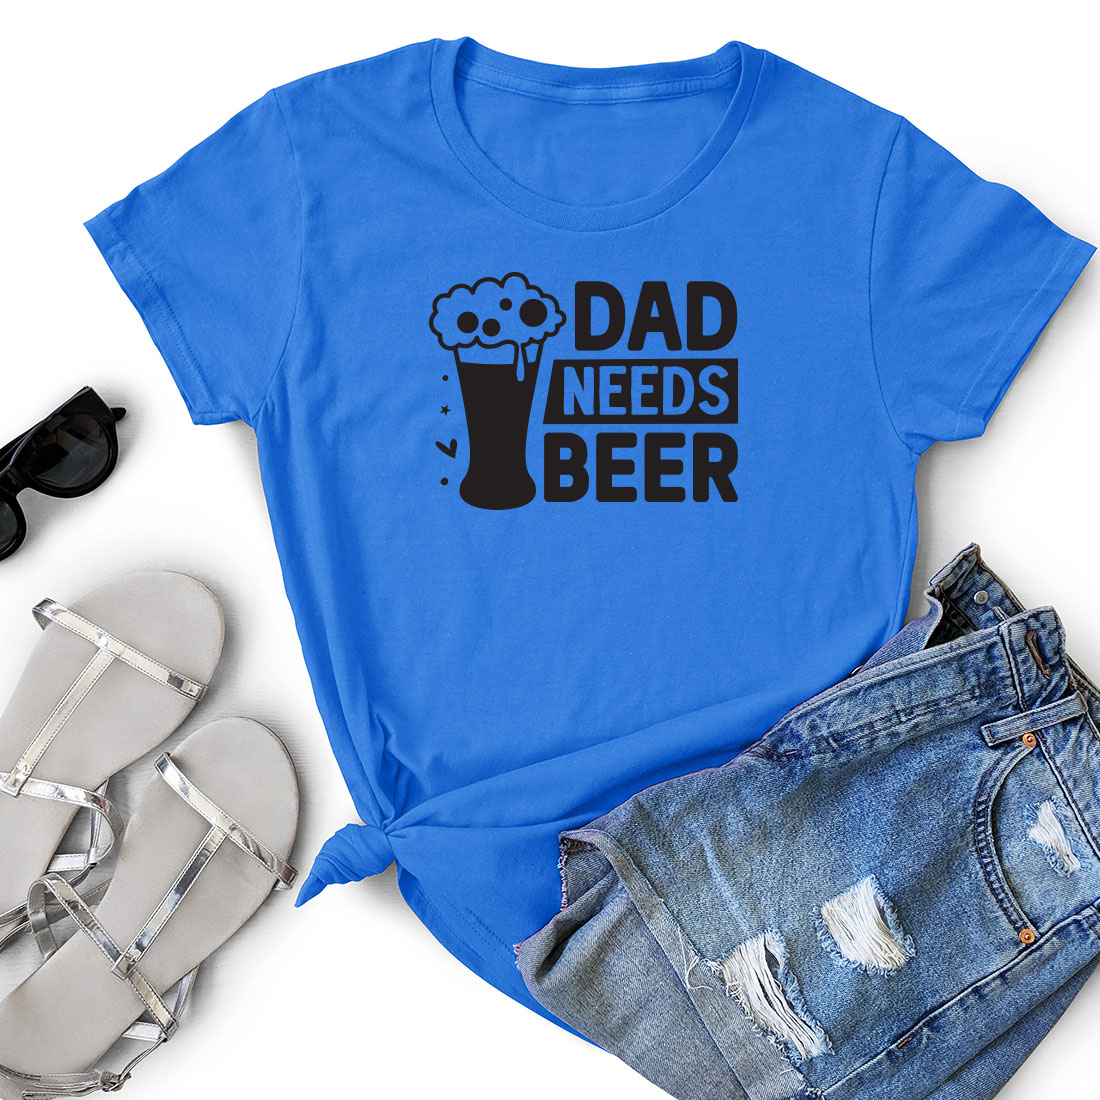 Shirt that says dad needs beer next to a pair of shorts.